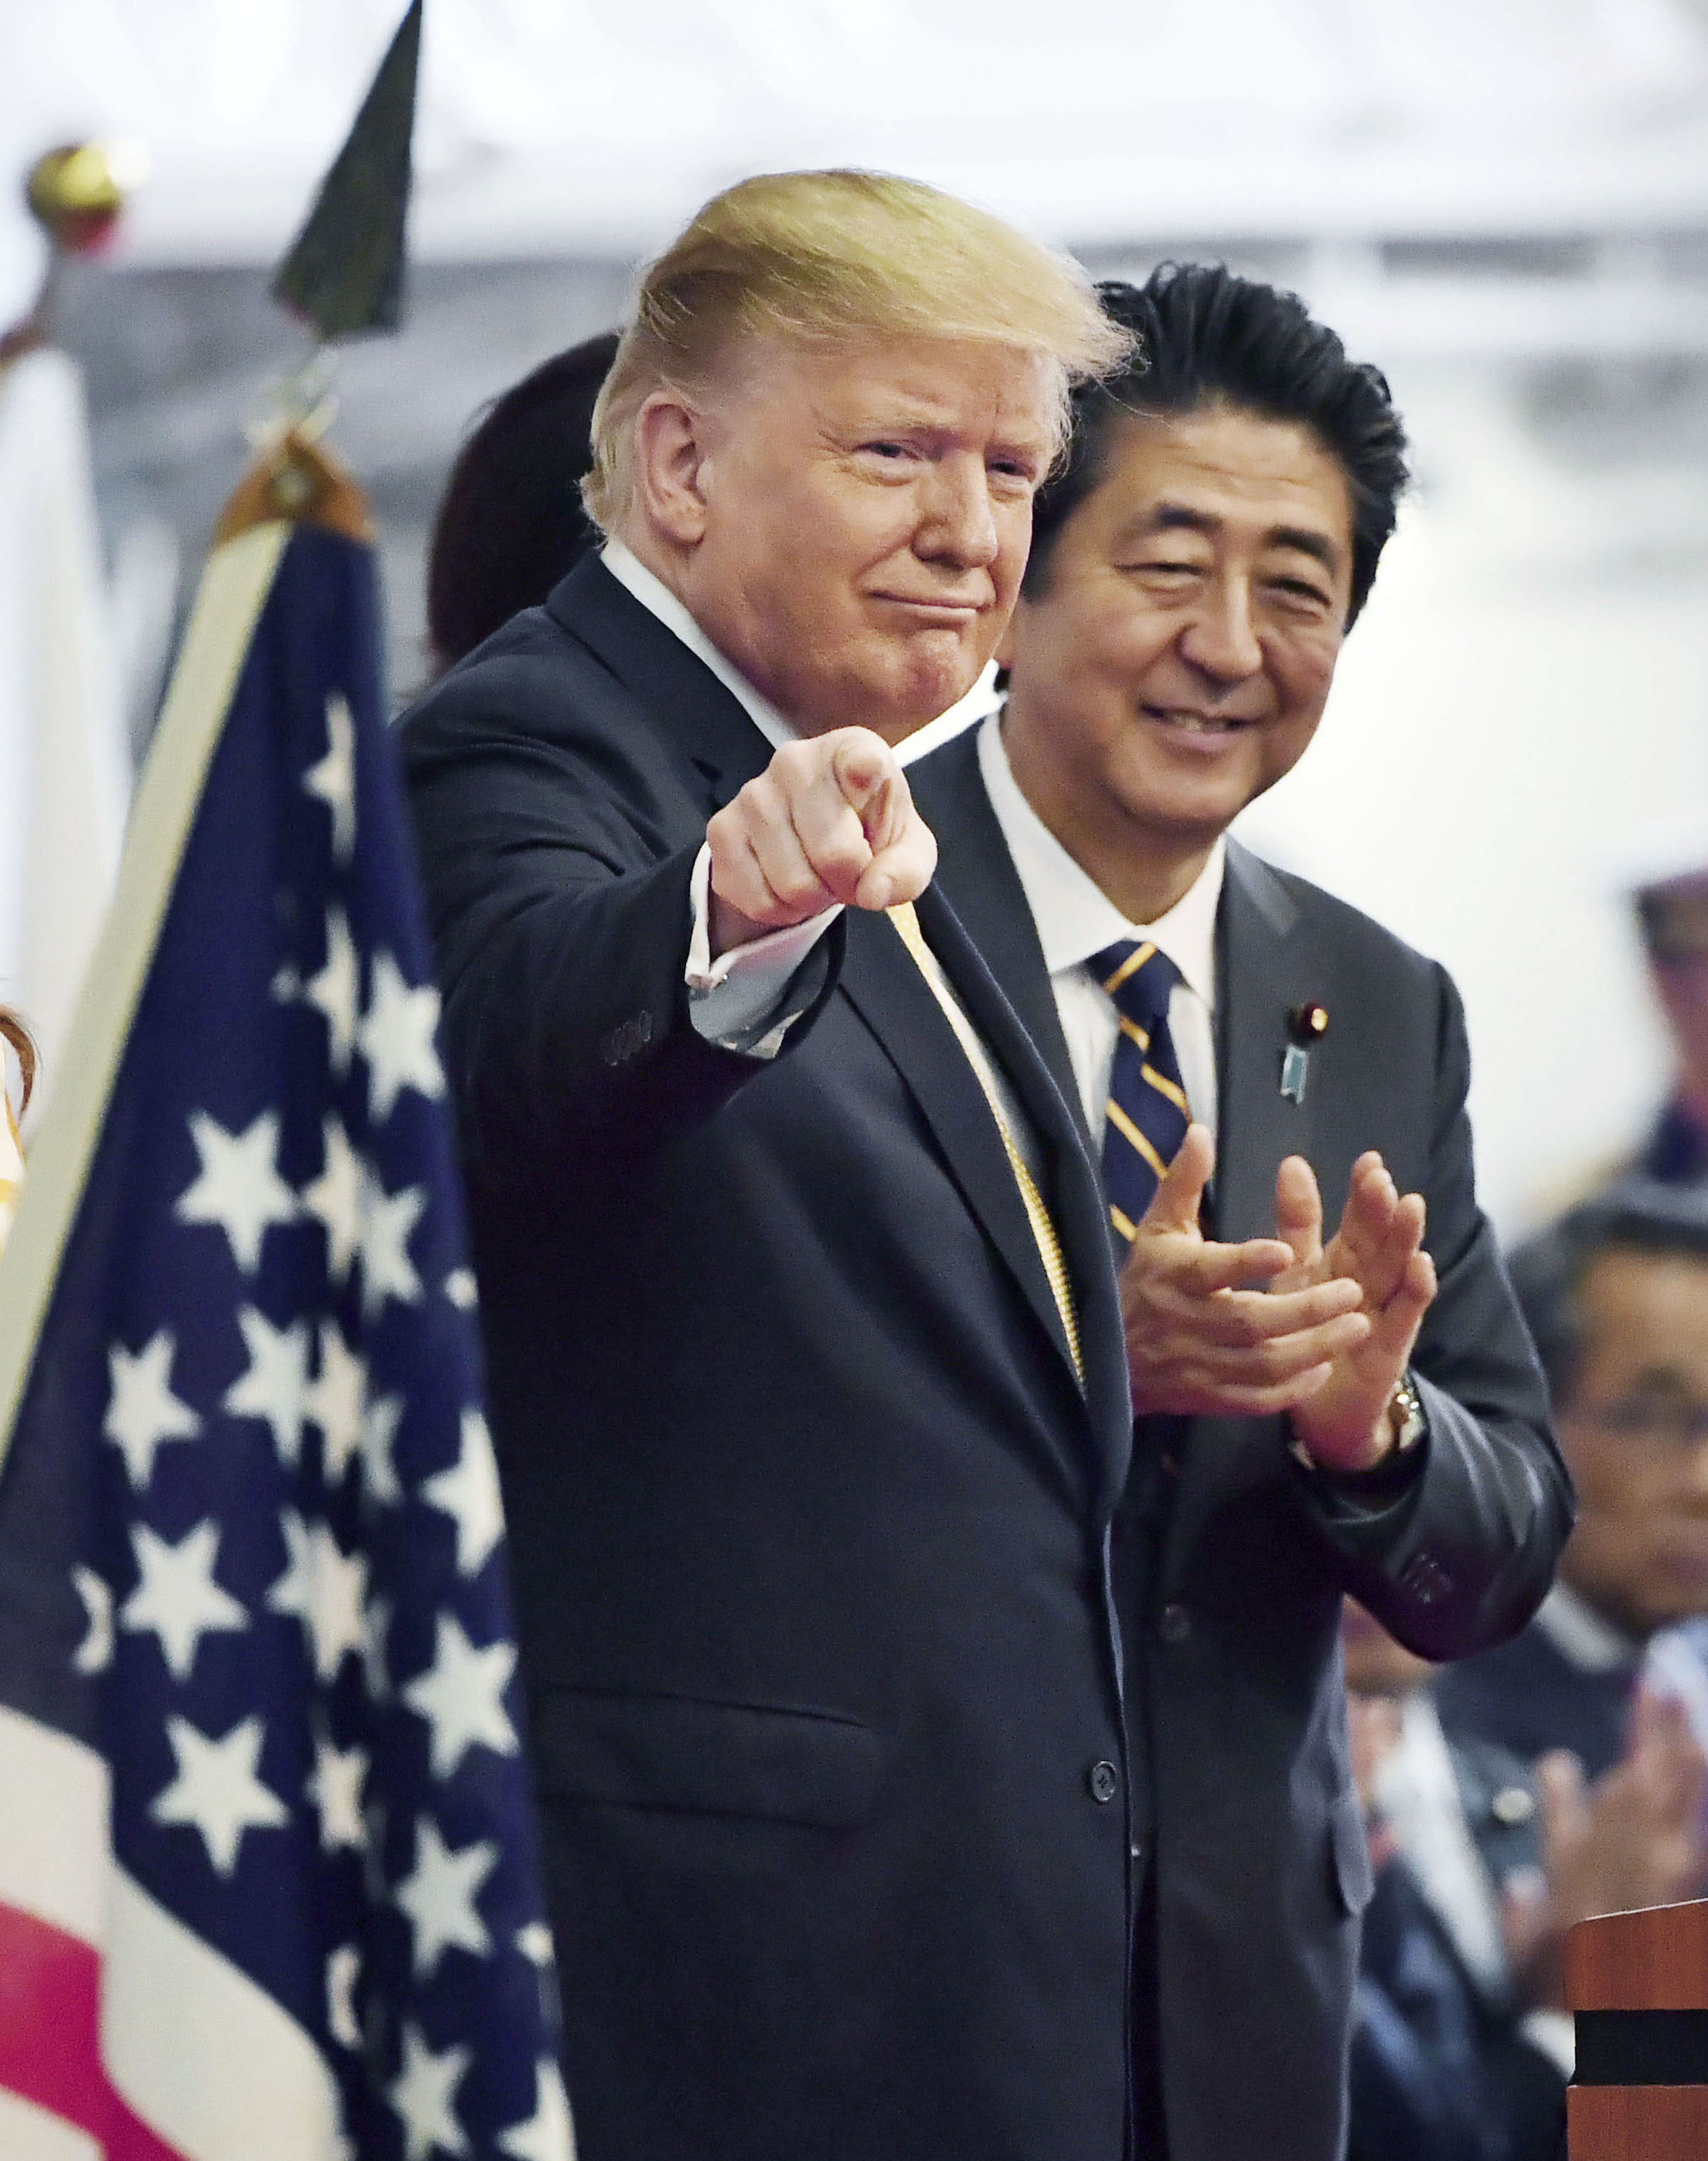 U.S. President Donald Trump (L) and Japanese Prime Minister Shinzo Abe are pictured during their inspection of the Japanese Maritime Self-Defense Force's helicopter-carrying destroyer Kaga, docked at the MSDF's base in Yokosuka, south of Tokyo, on May 28, 2019. (Pool photo) (Kyodo via AP Images) ==Kyodo